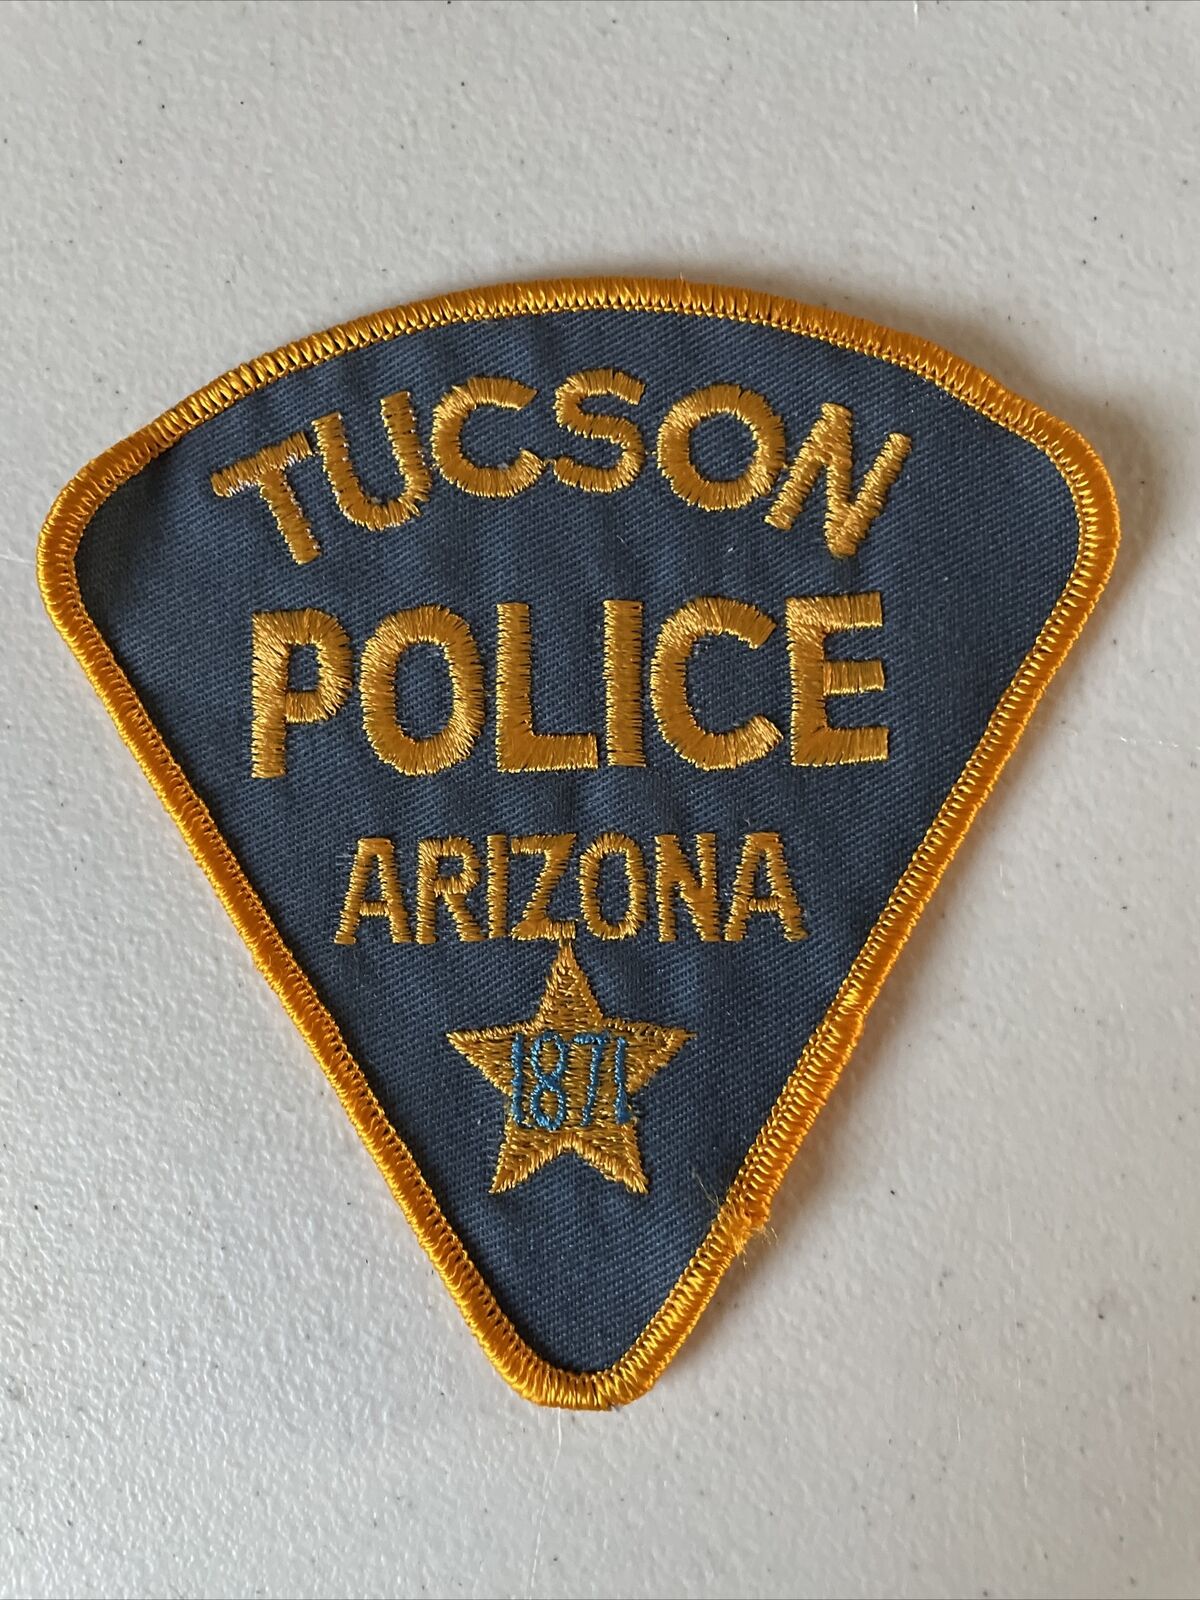 Tucson Police Department Patch